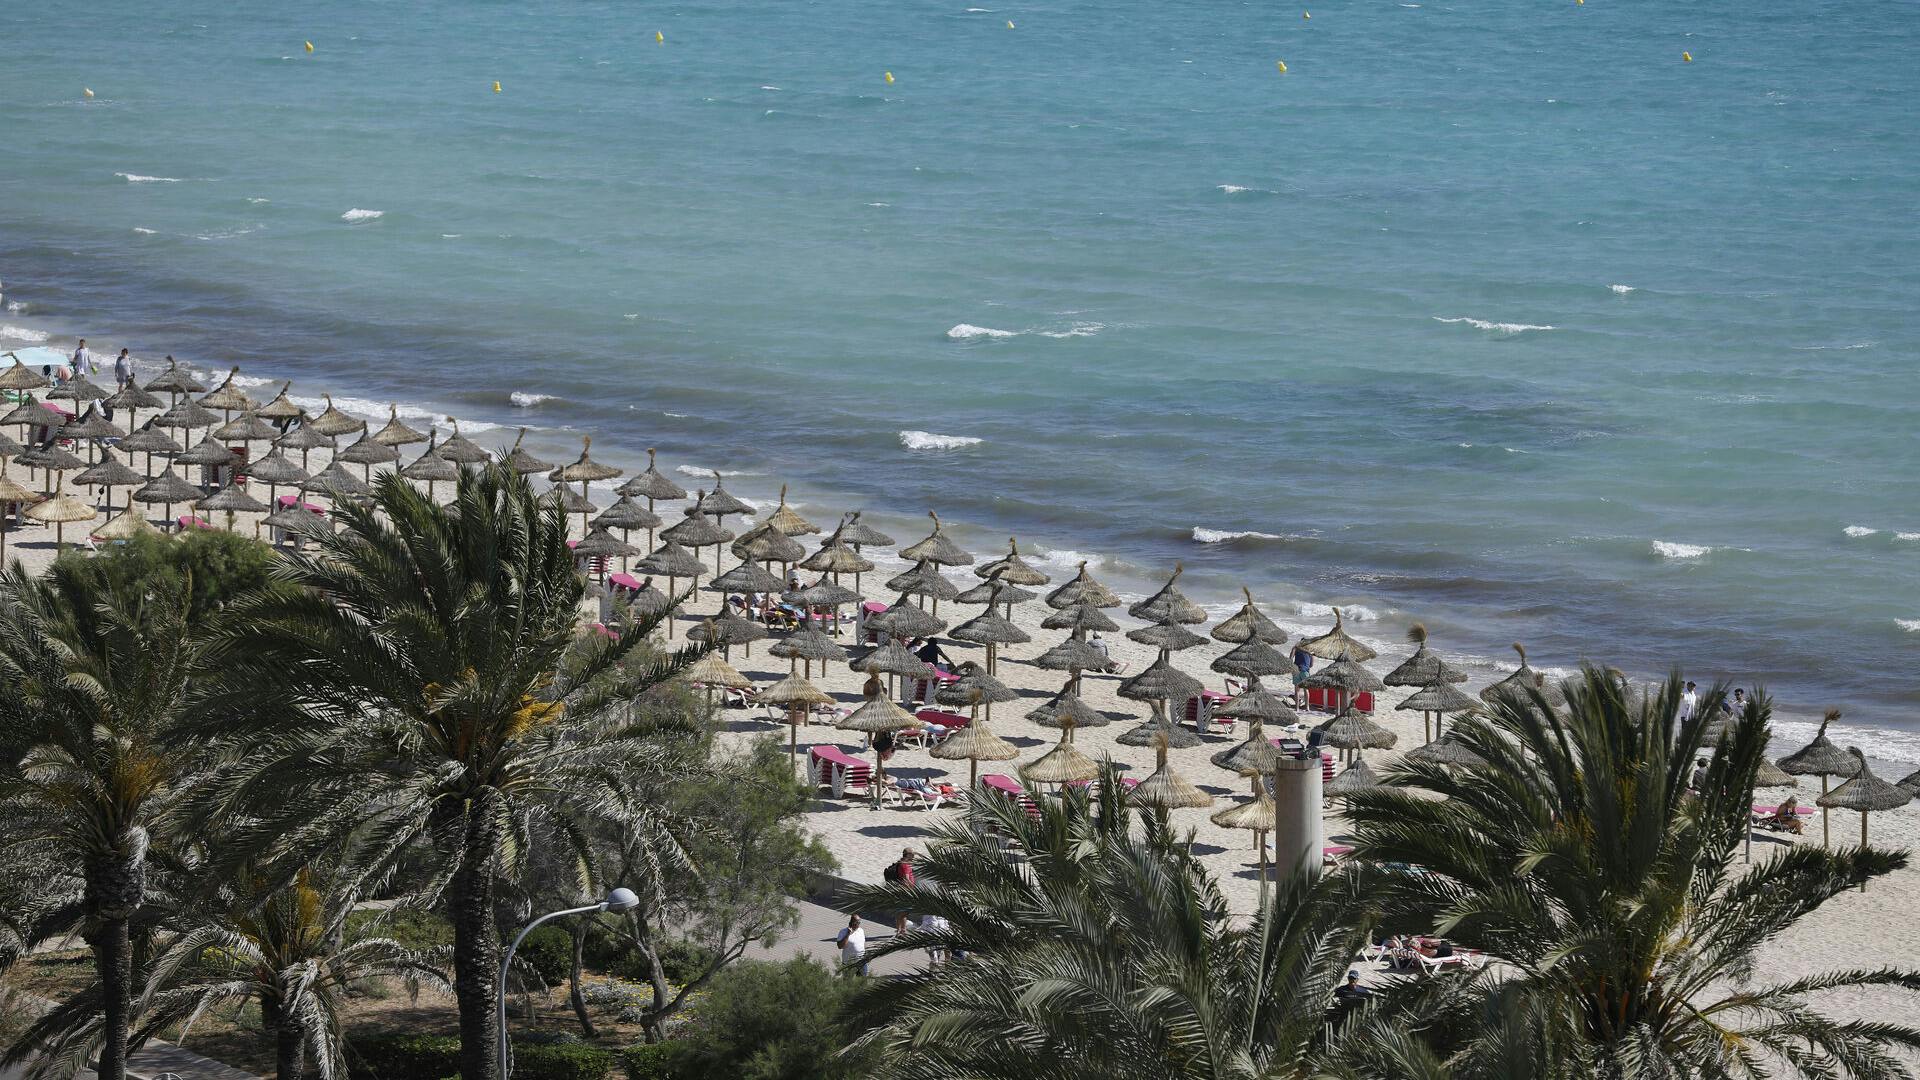 PRODUCTION - 11 May 2022, Spain, Palma: General view of Playa de Palma on the beach of Arenal in Mallorca. The tourism industry on the vacation island of Mallorca, which is popular with Germans, is more optimistic about the future again this year. (to dpa "Hotels in Mallorca hope for good first season without Corona rules") Photo by: Clara Margais/picture-alliance/dpa/AP Images